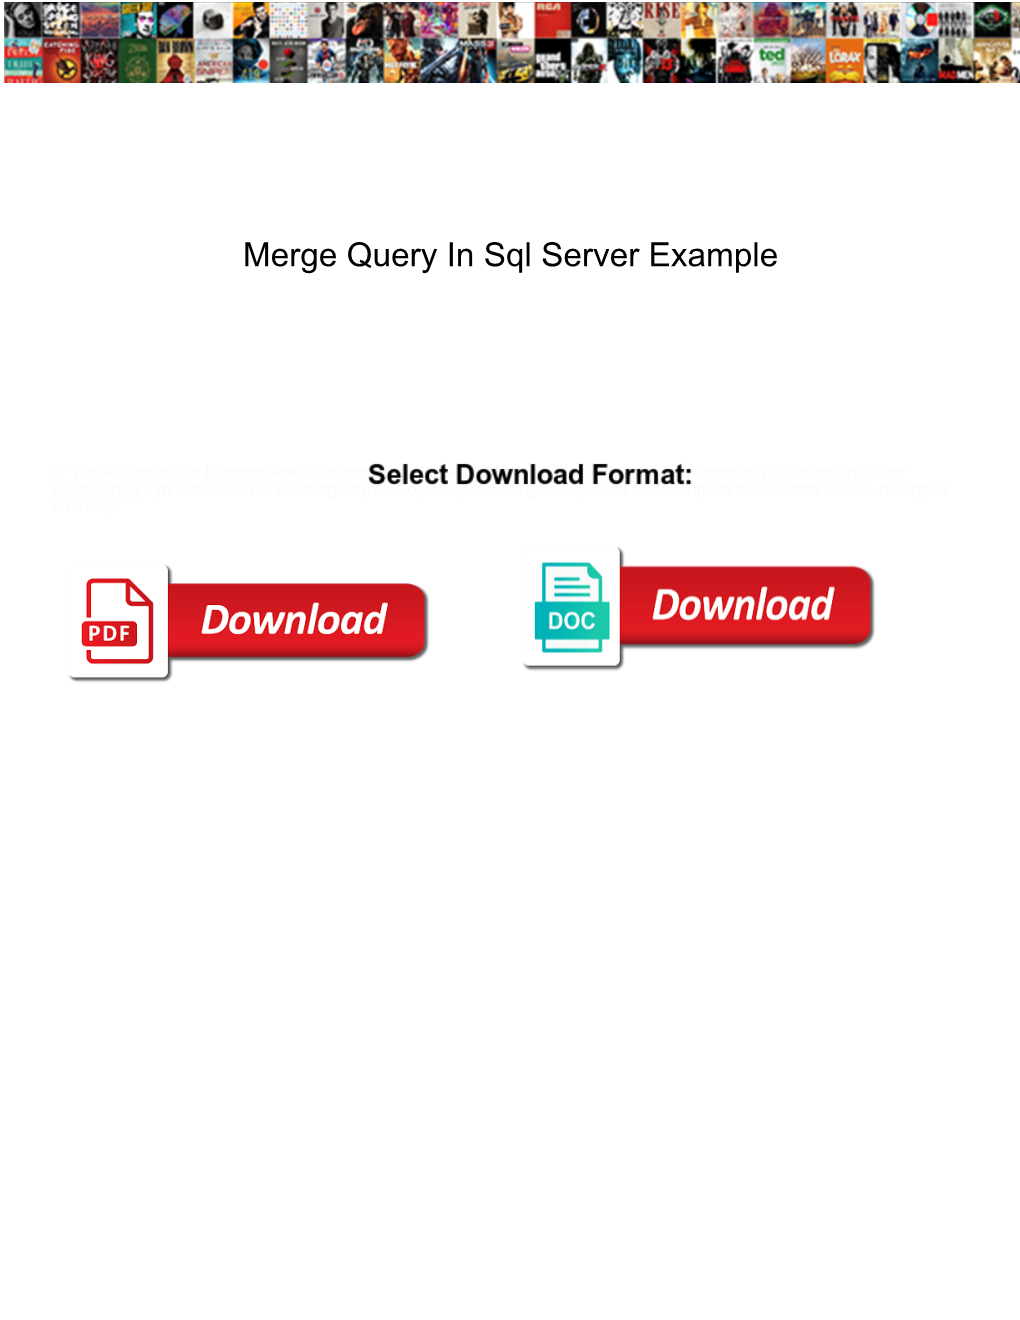 Merge Query in Sql Server Example